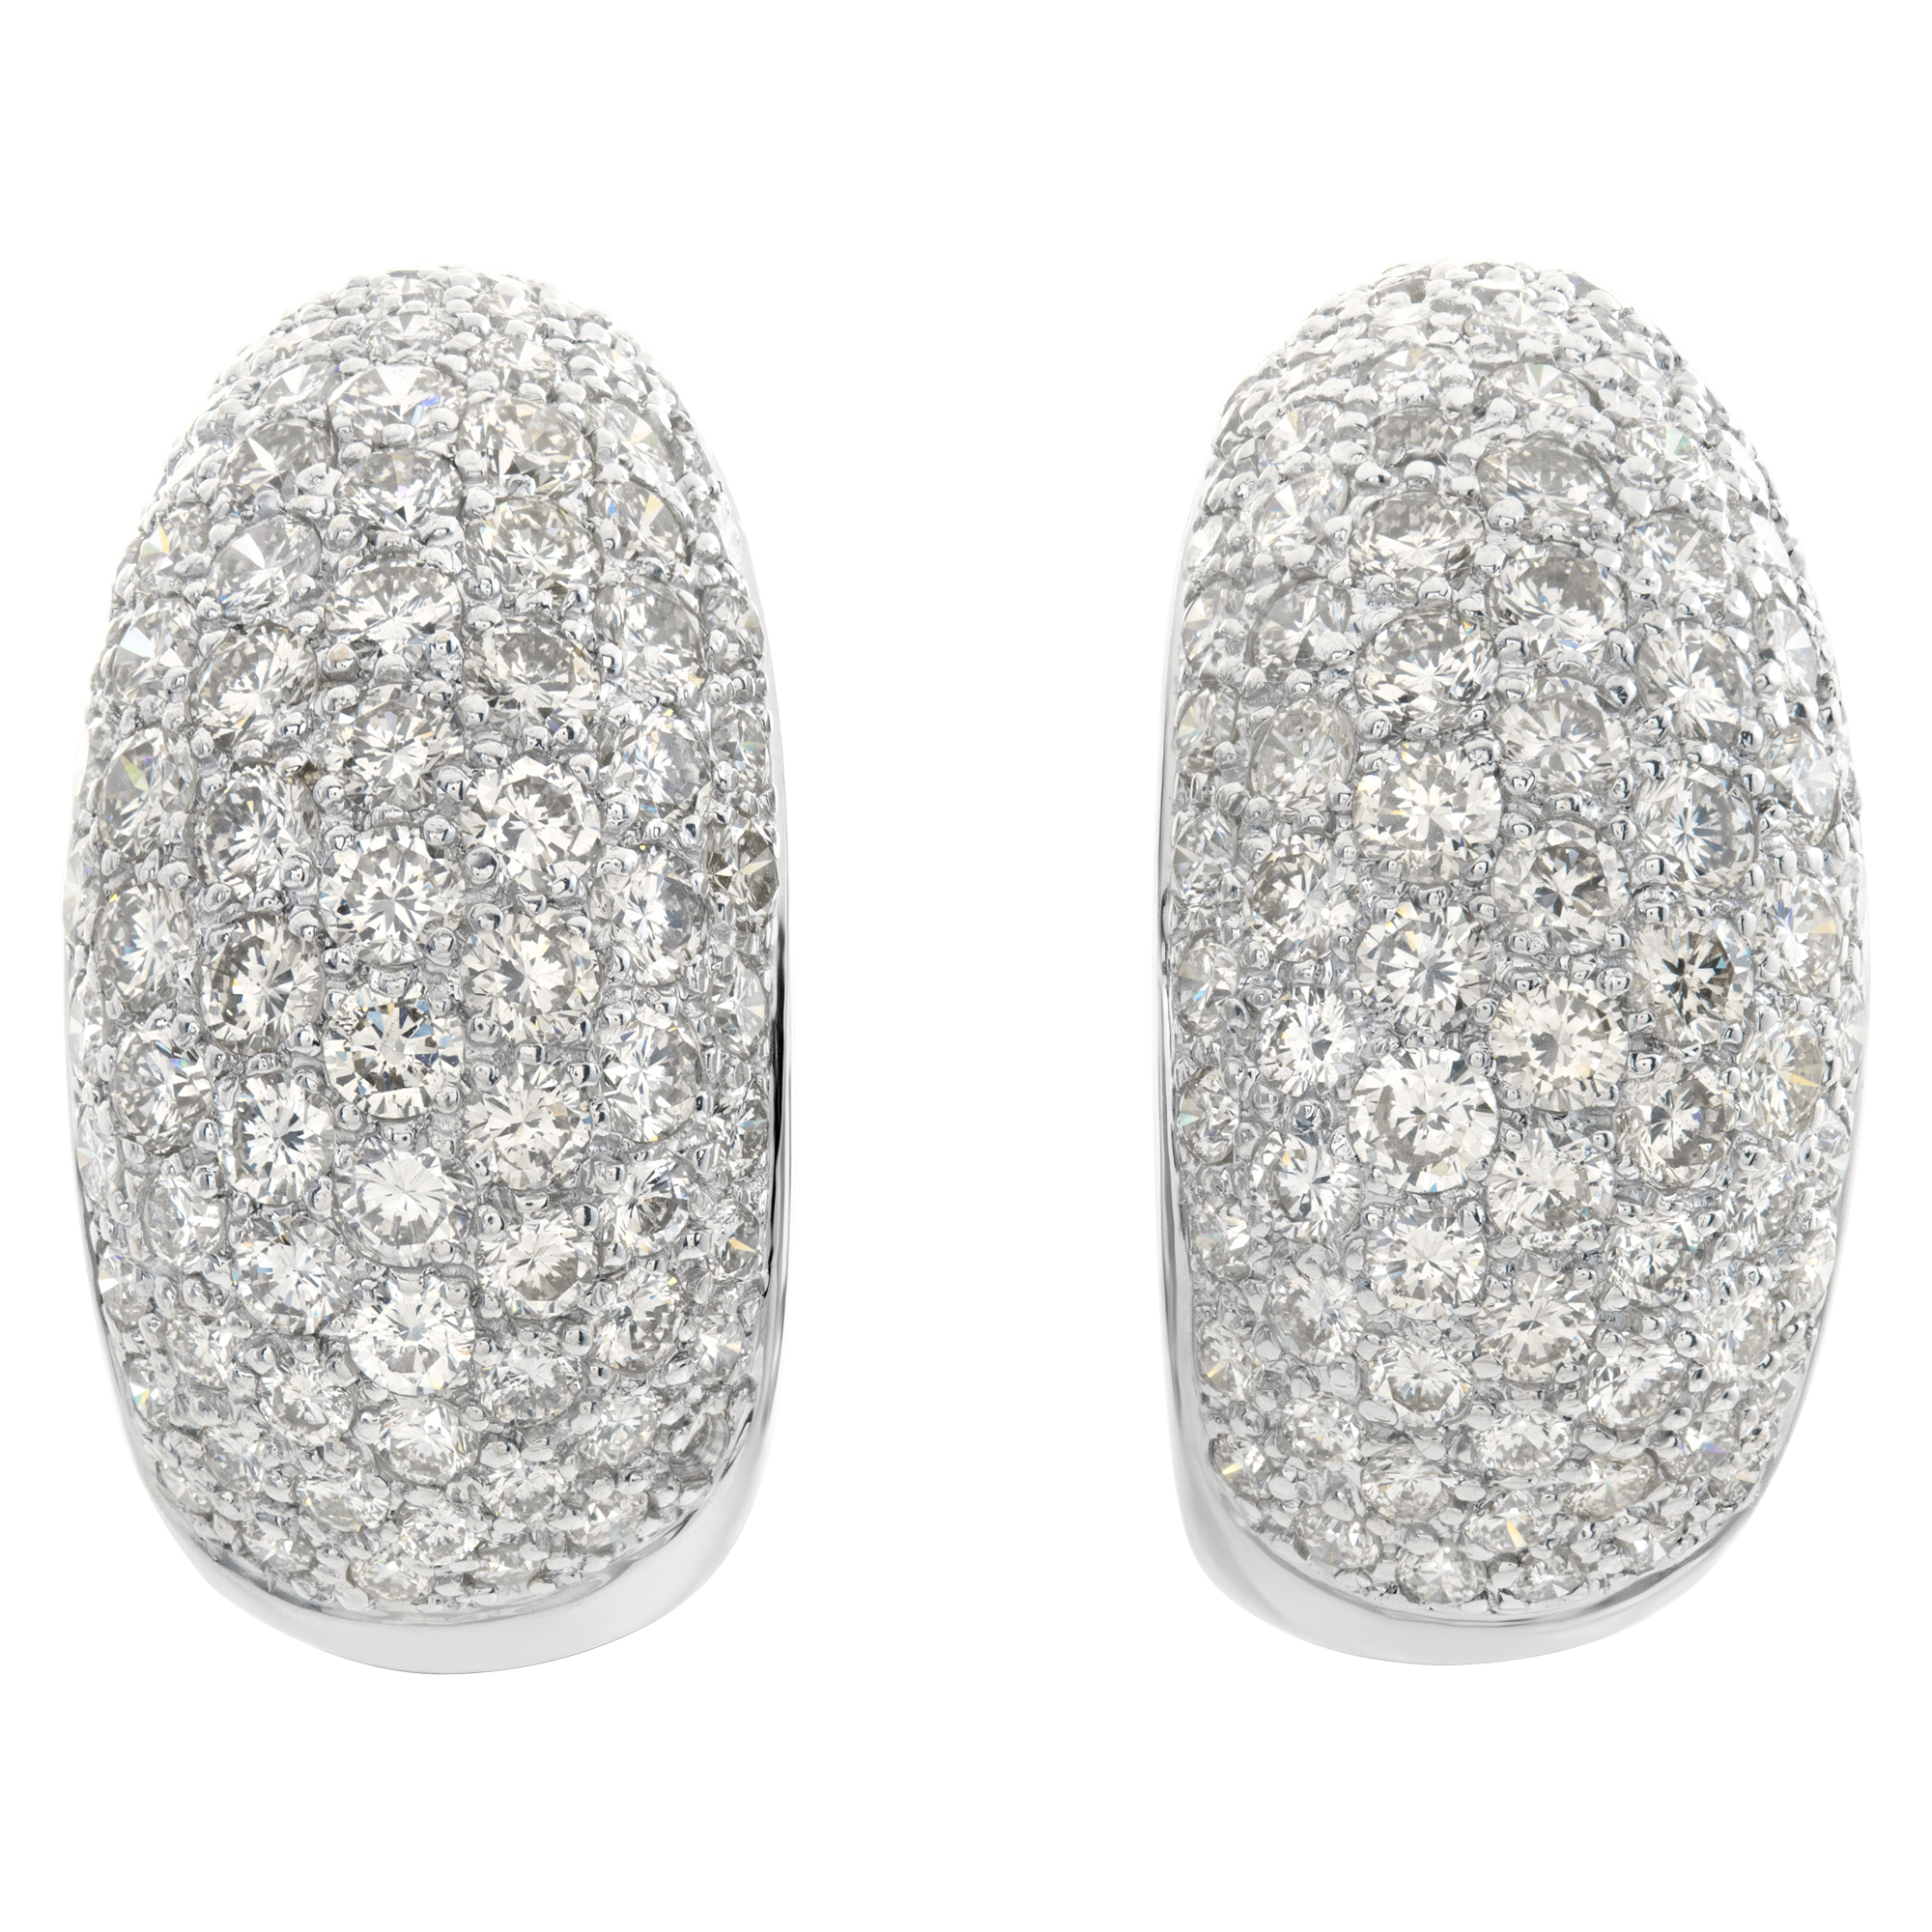 Half hoop diamonds earrings in 18k white gold. Round brilliant cut diamonds total approx. weight over 4 carats image 1